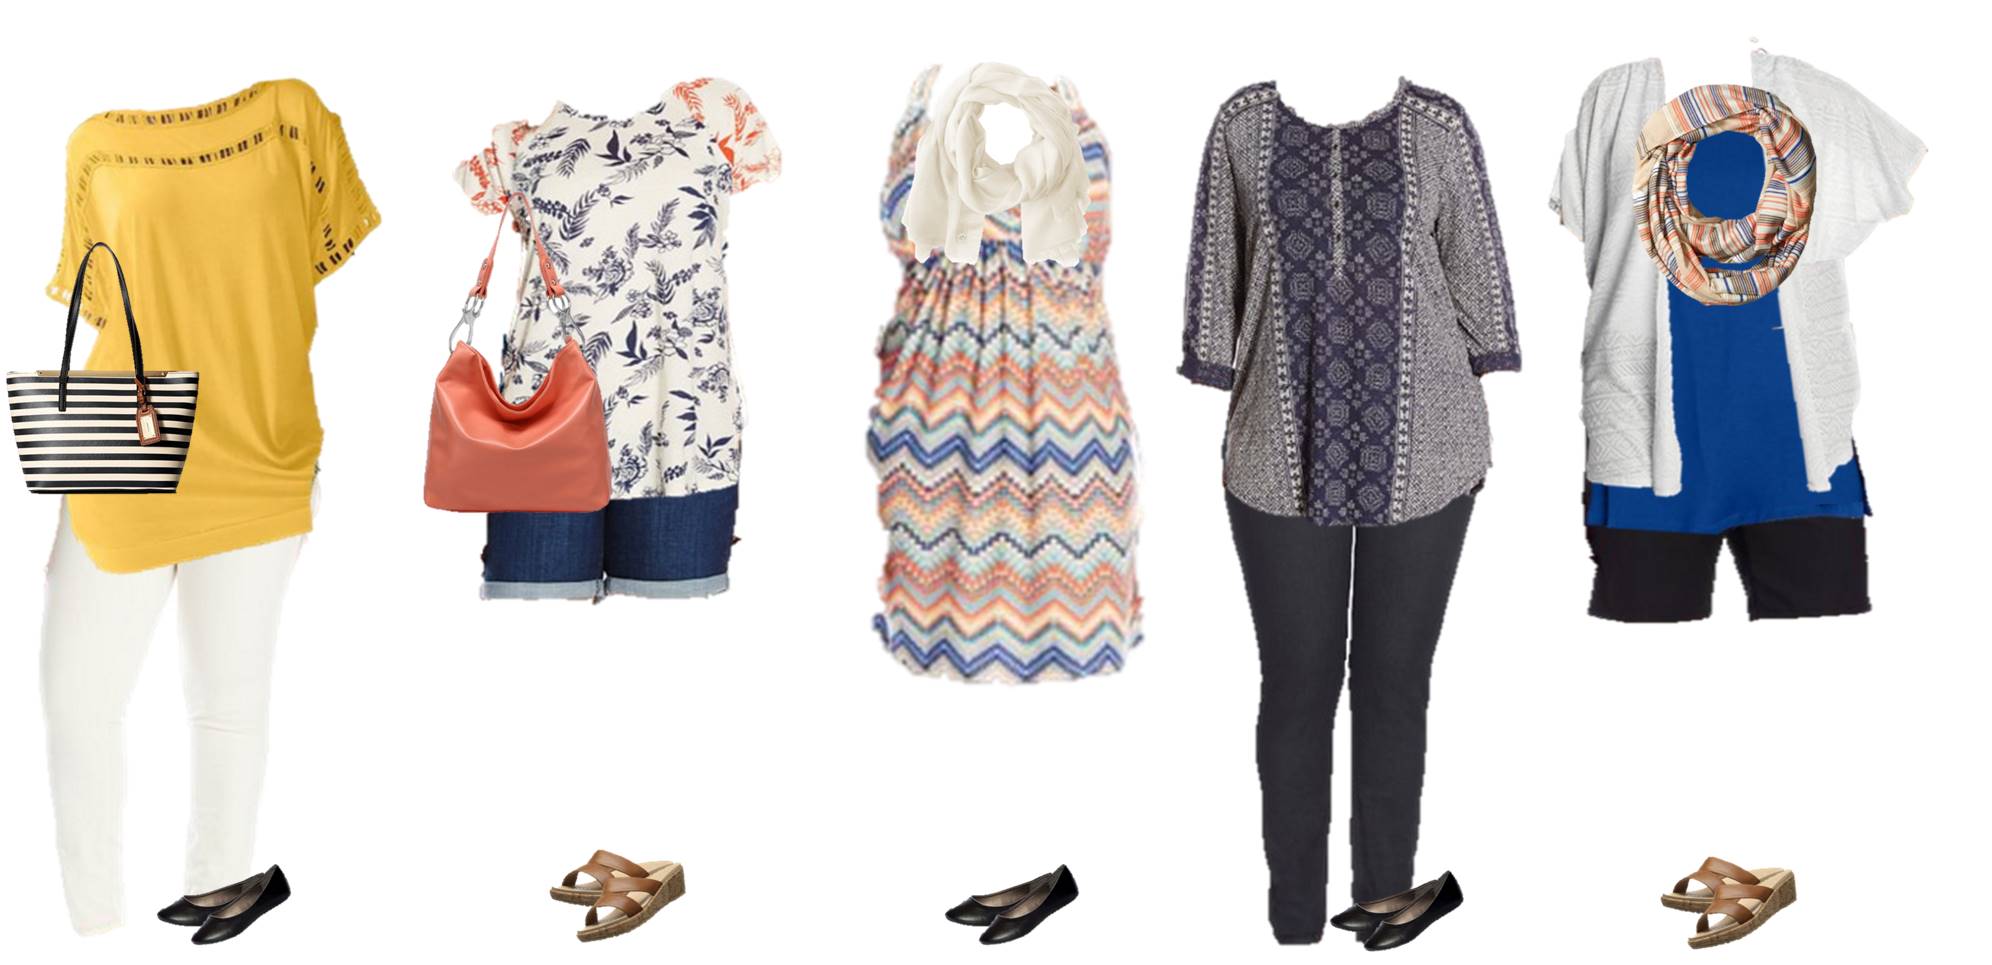 Women's Mix & Match Plus Size Summer Styles from Amazon